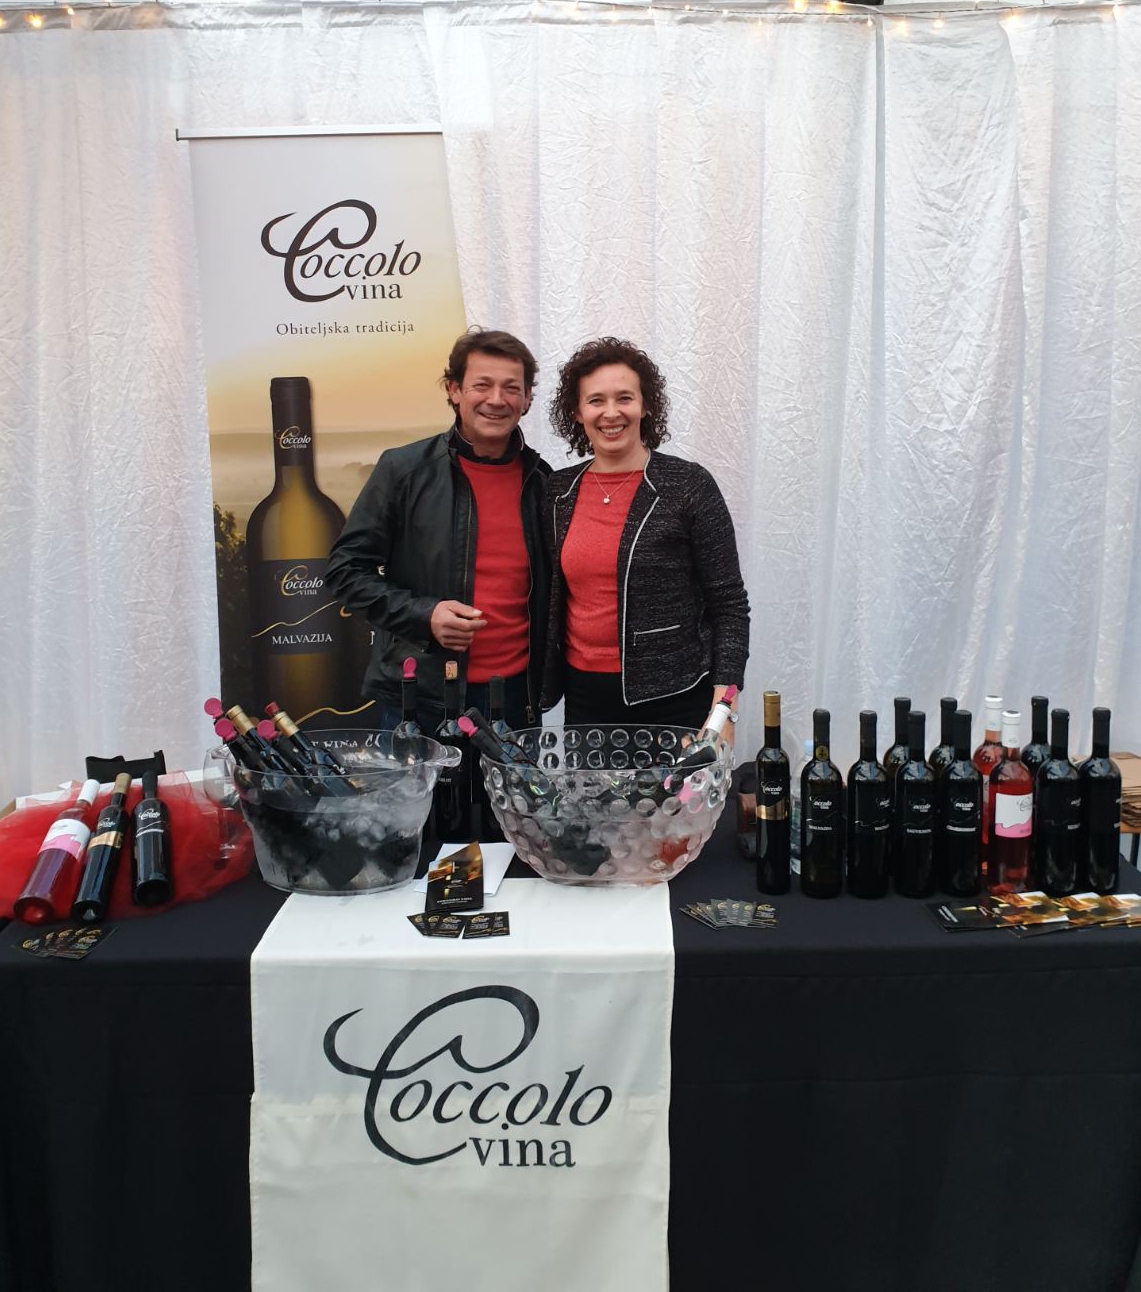 COCCOLO WINE AND OLIVE